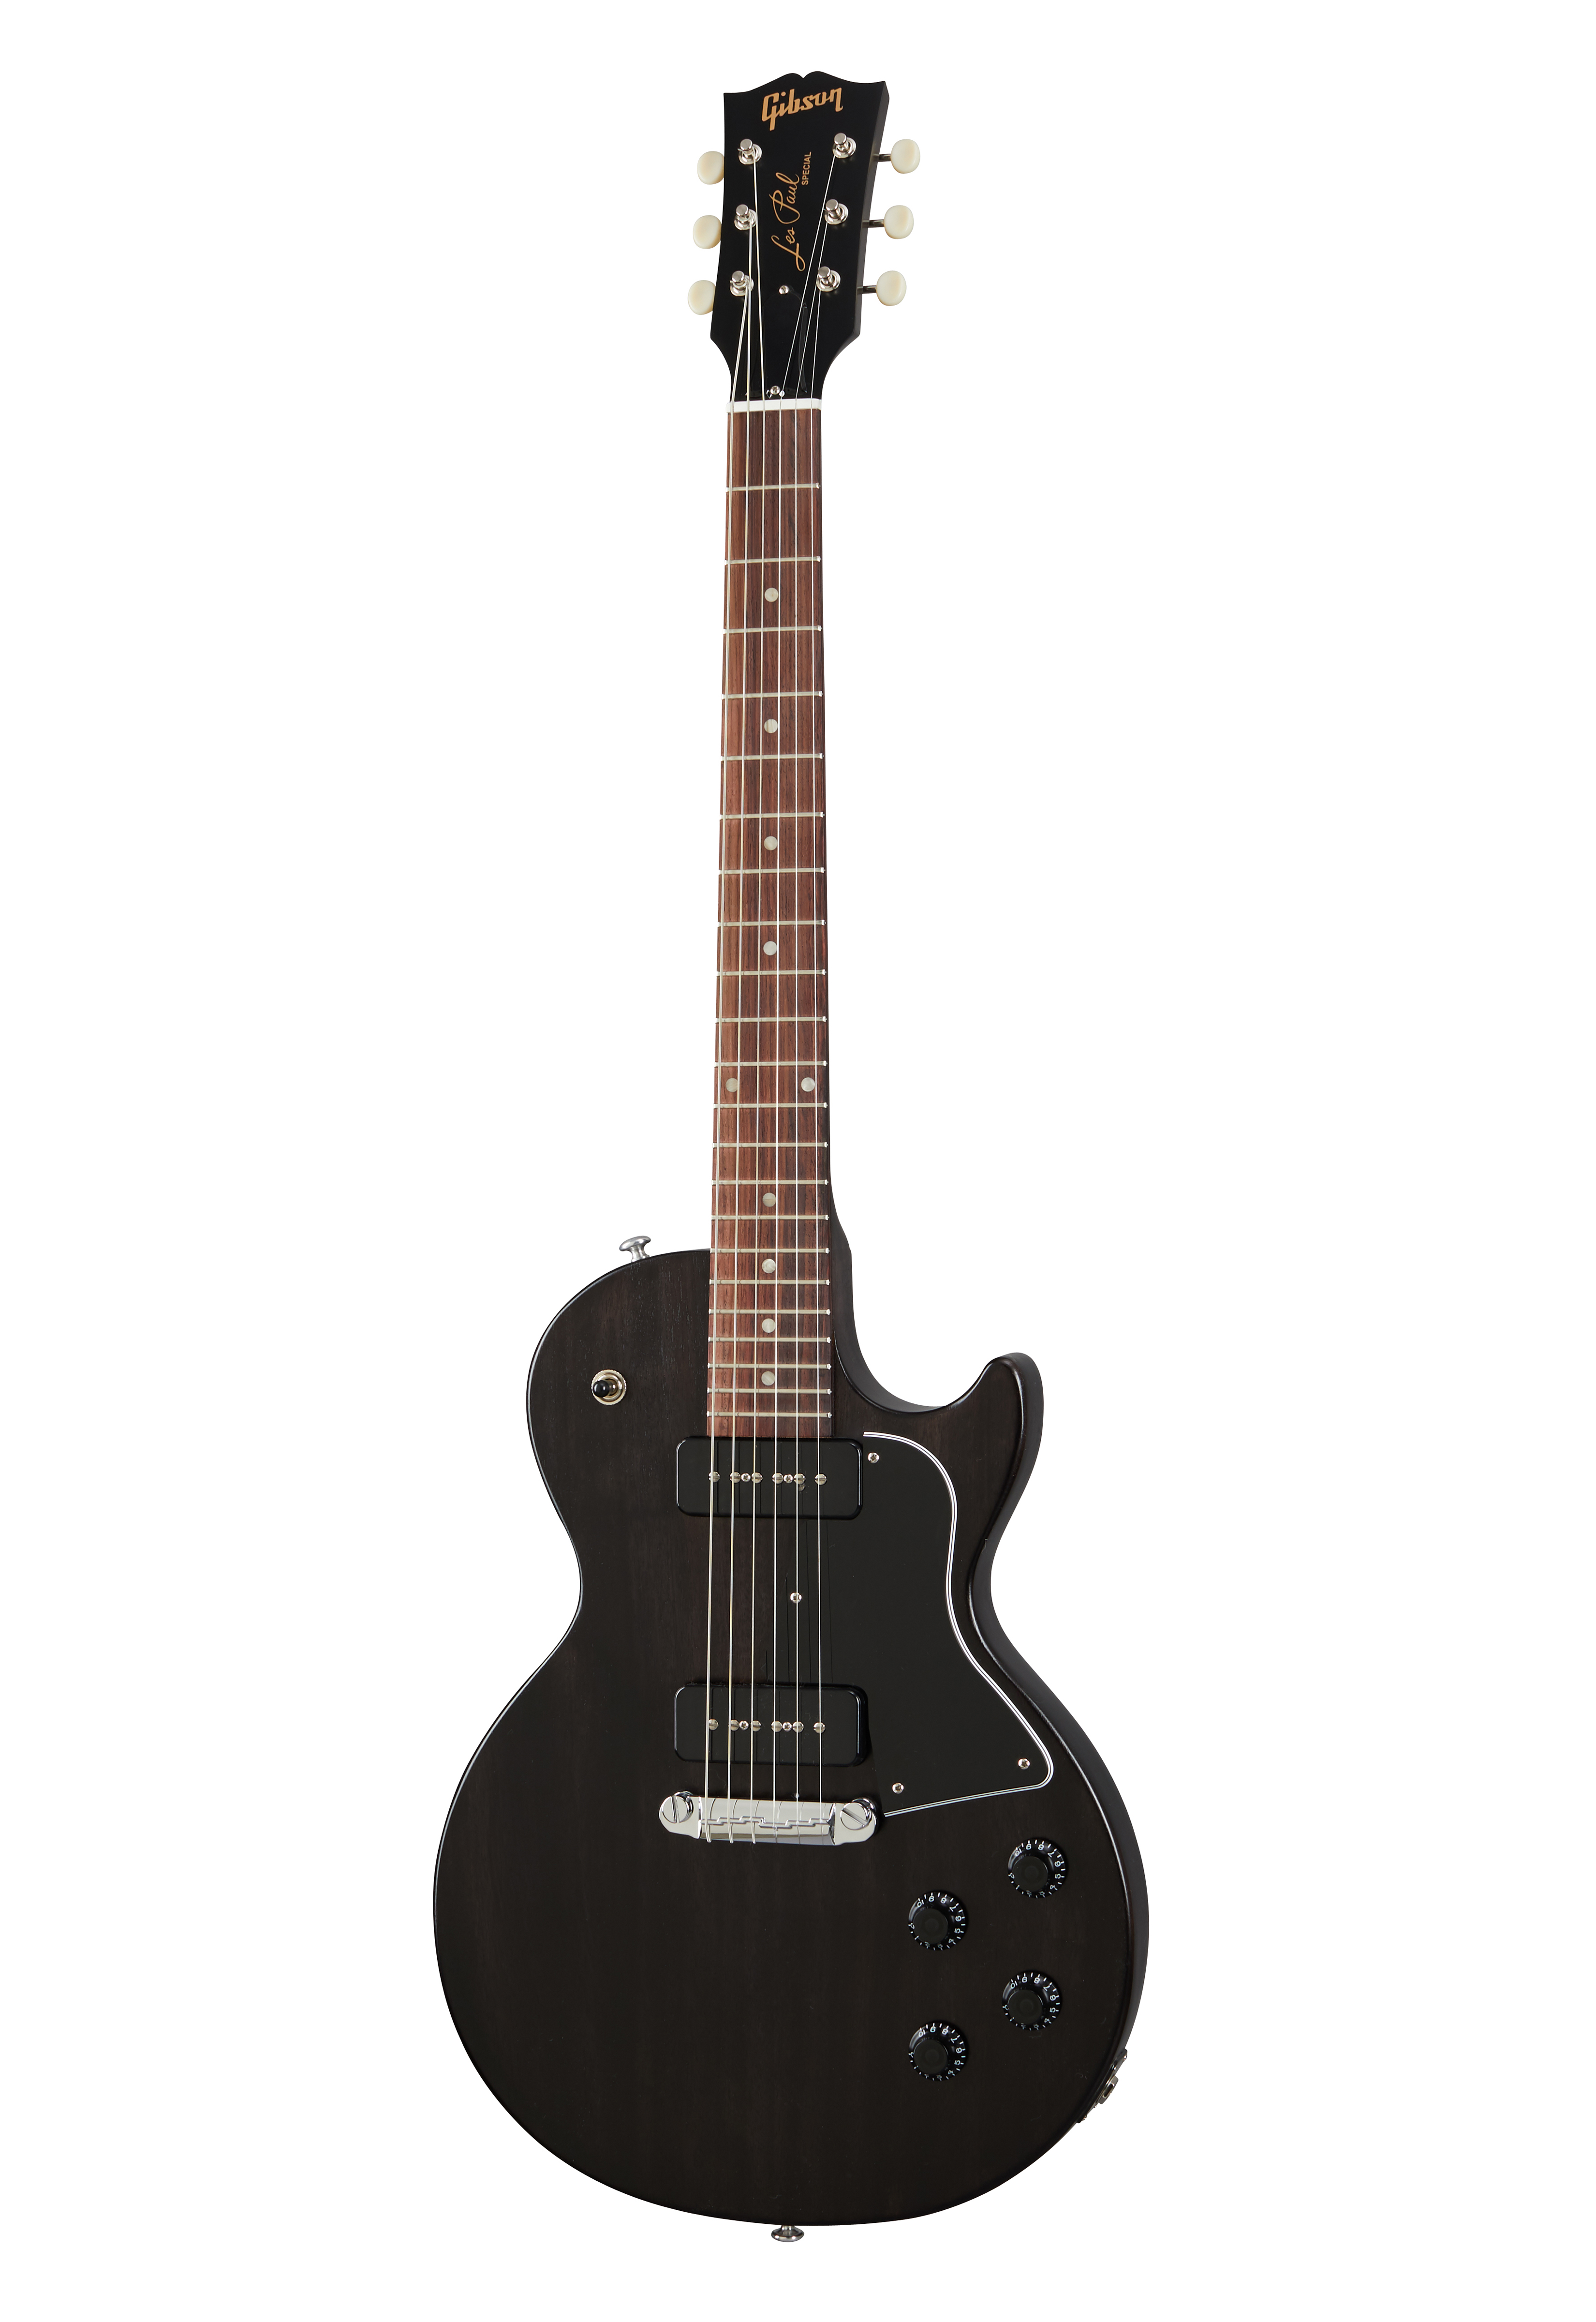 Gibson lespaul special P90 black - エレキギター